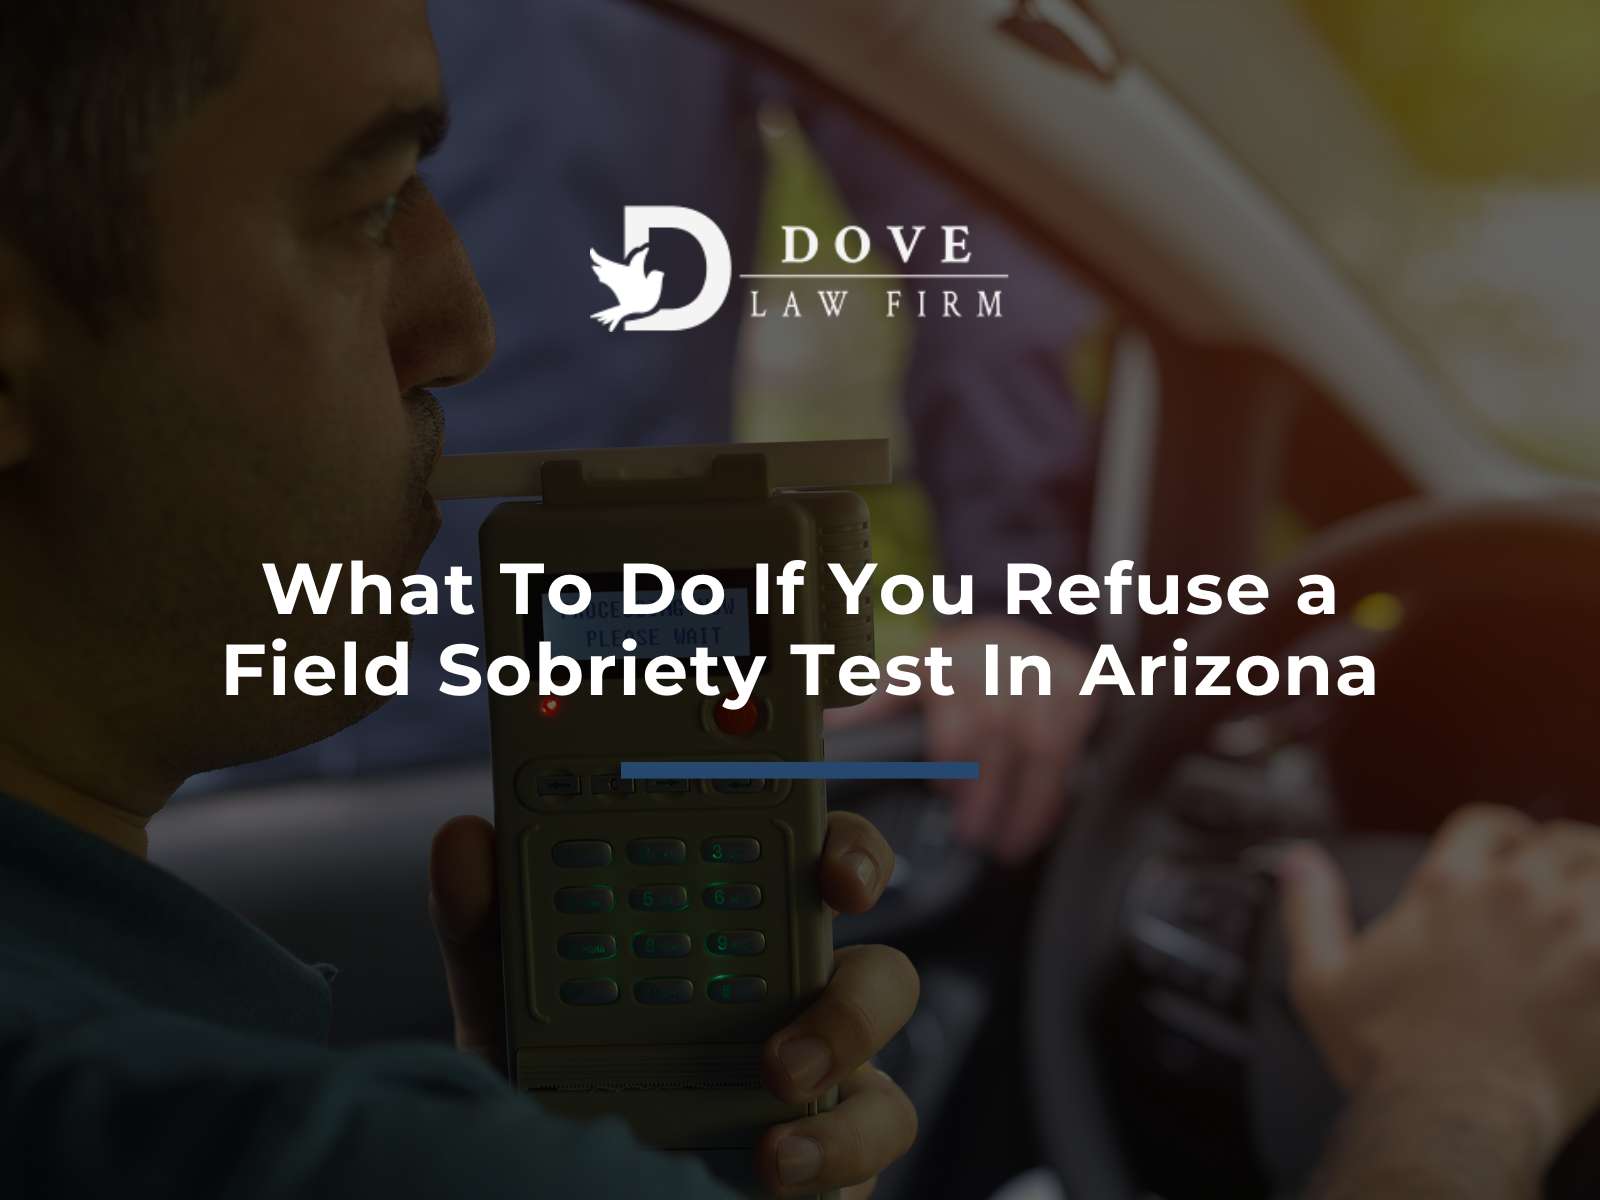 What To Do If You Refuse a Field Sobriety Test In Arizona